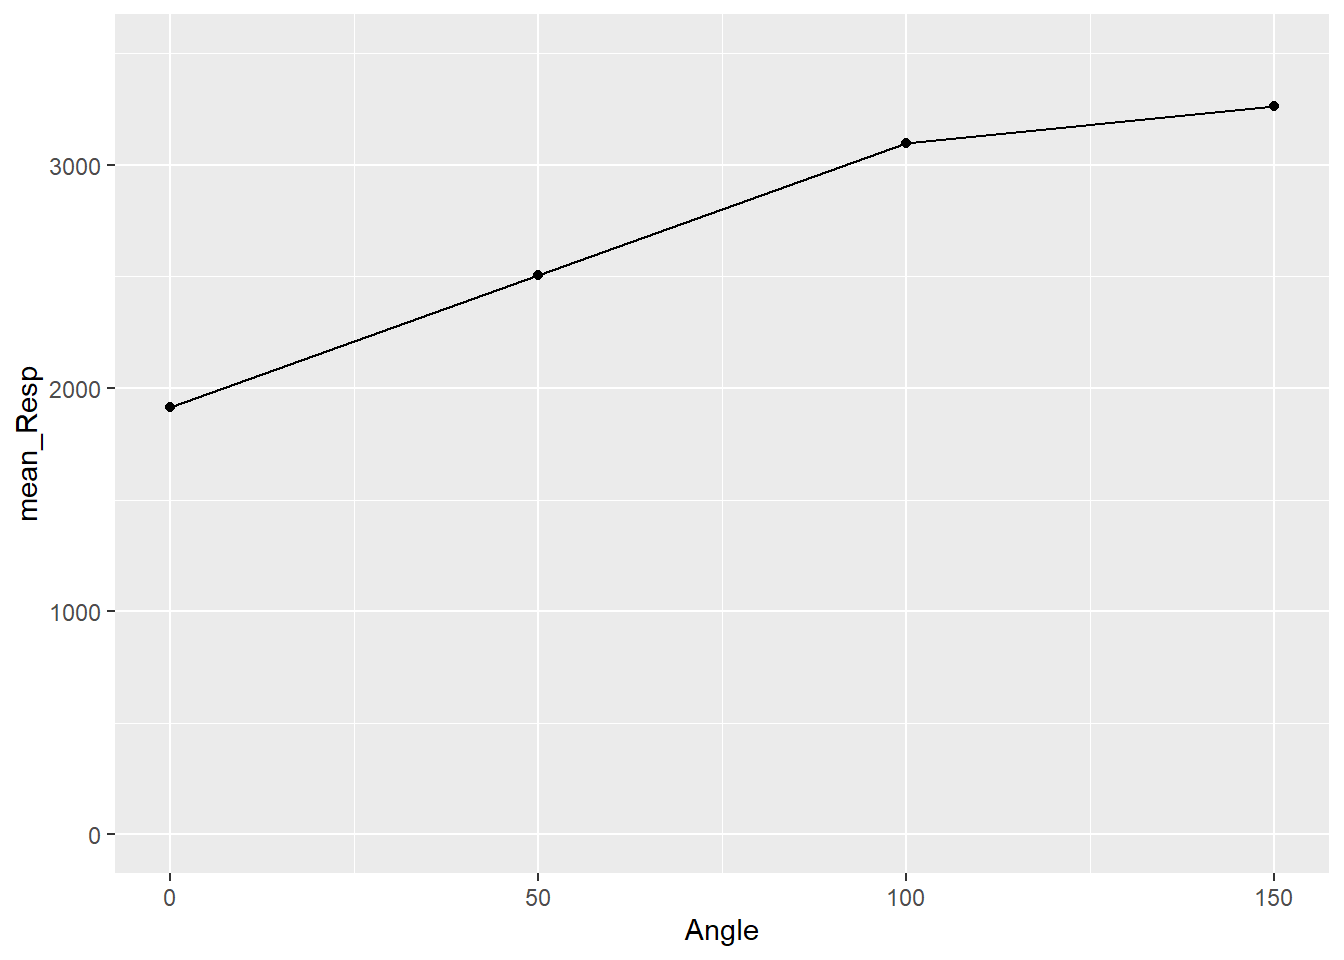 Basic Scatterplot of Response Time by Angle of Rotation